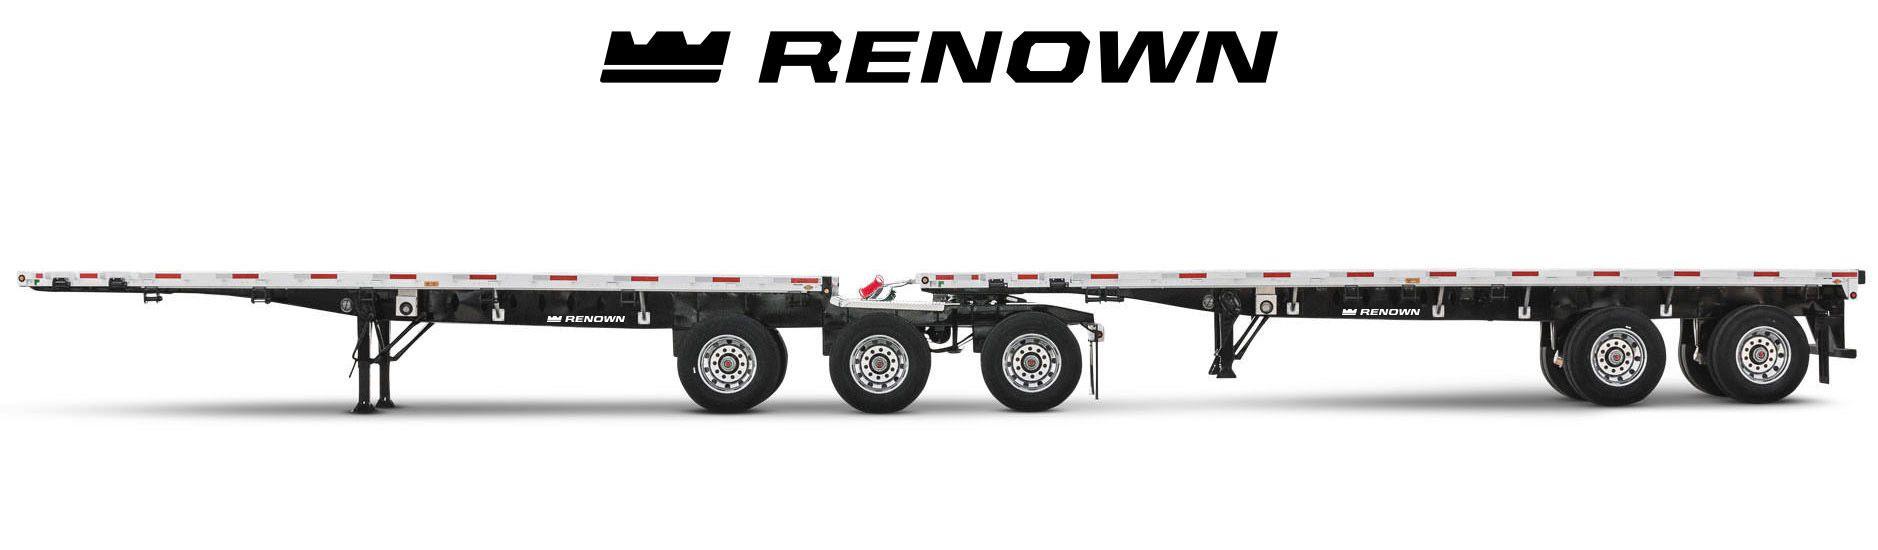 Flatbed Logo - Premier manufacturer of flatbeds, hopper trailers, and heavy haul ...